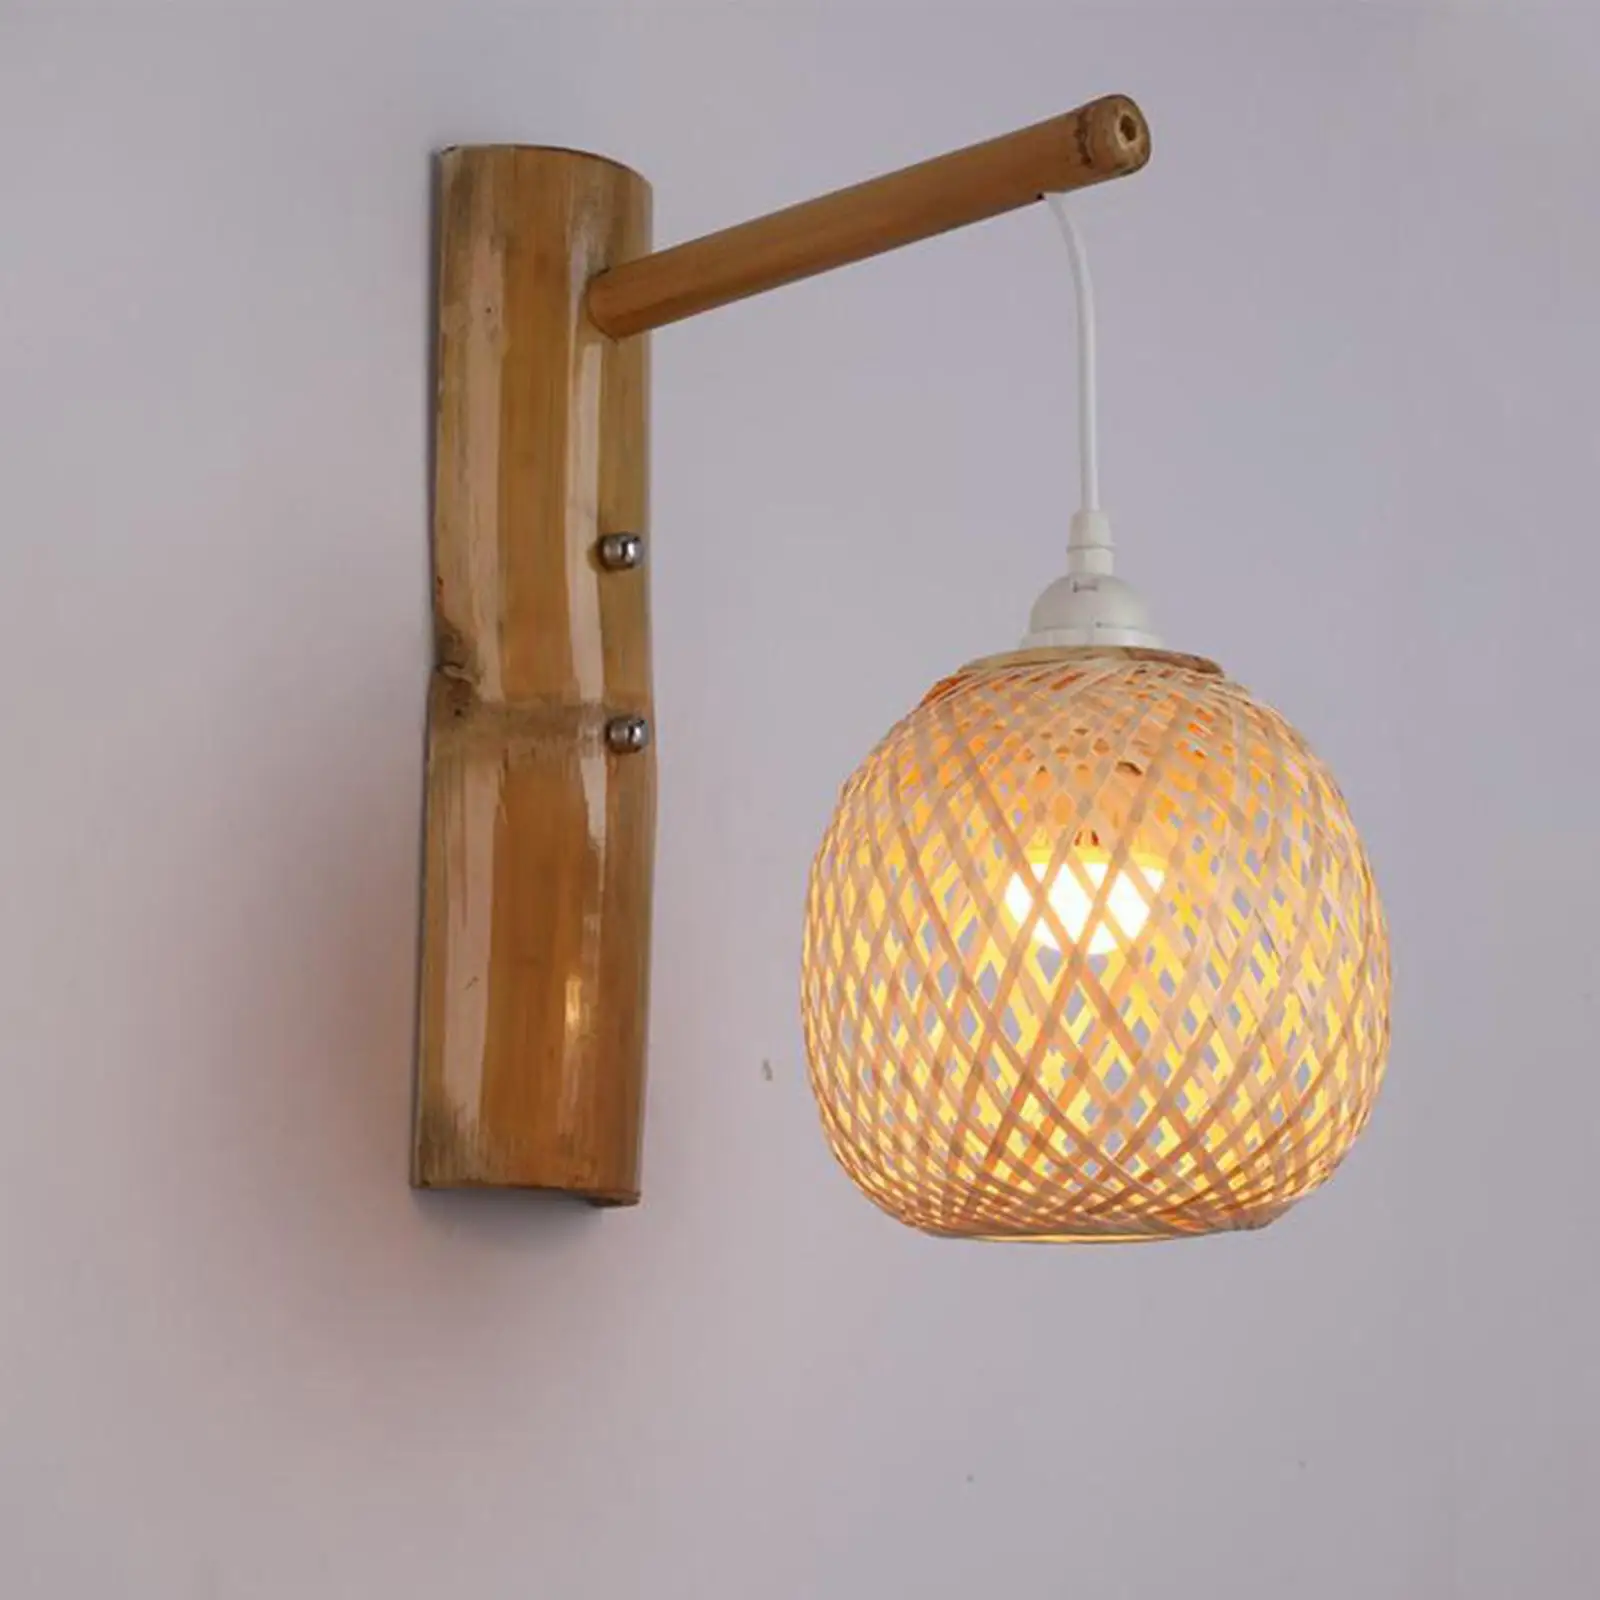 Rustic Wall Sconce, Woven Light Fixture Wall Mounted Light for Hallway